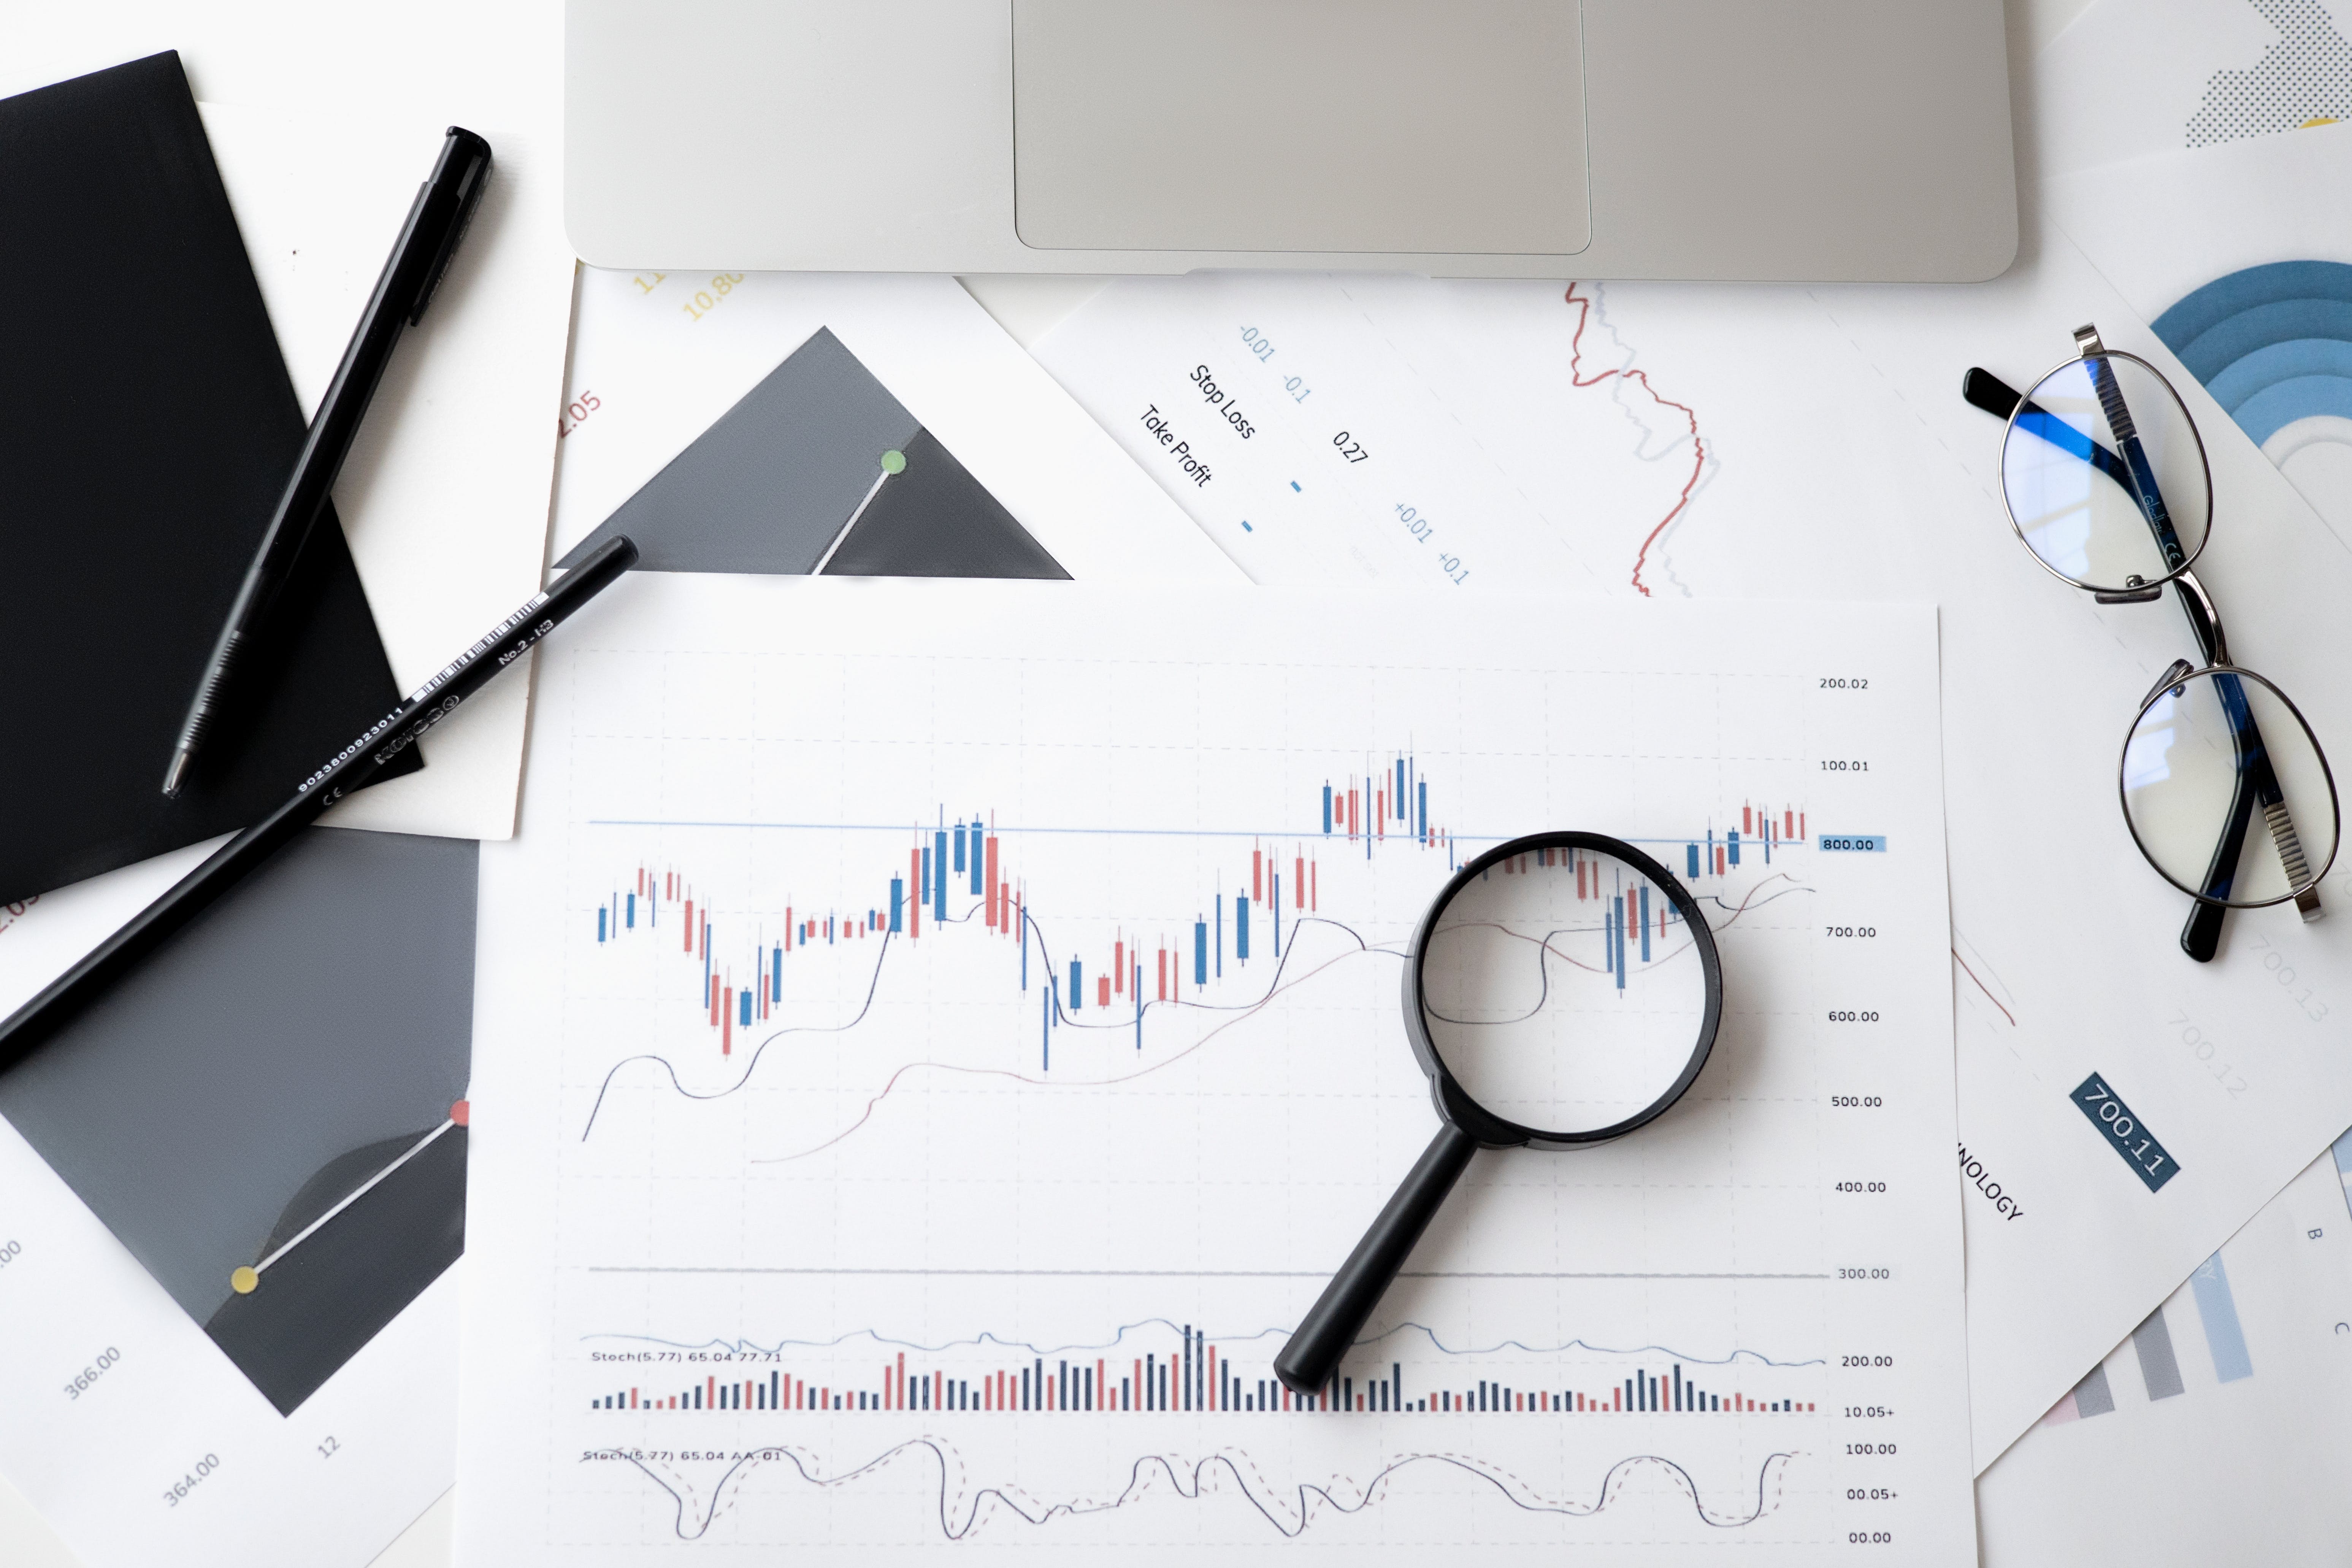 What is Financial Analysis?